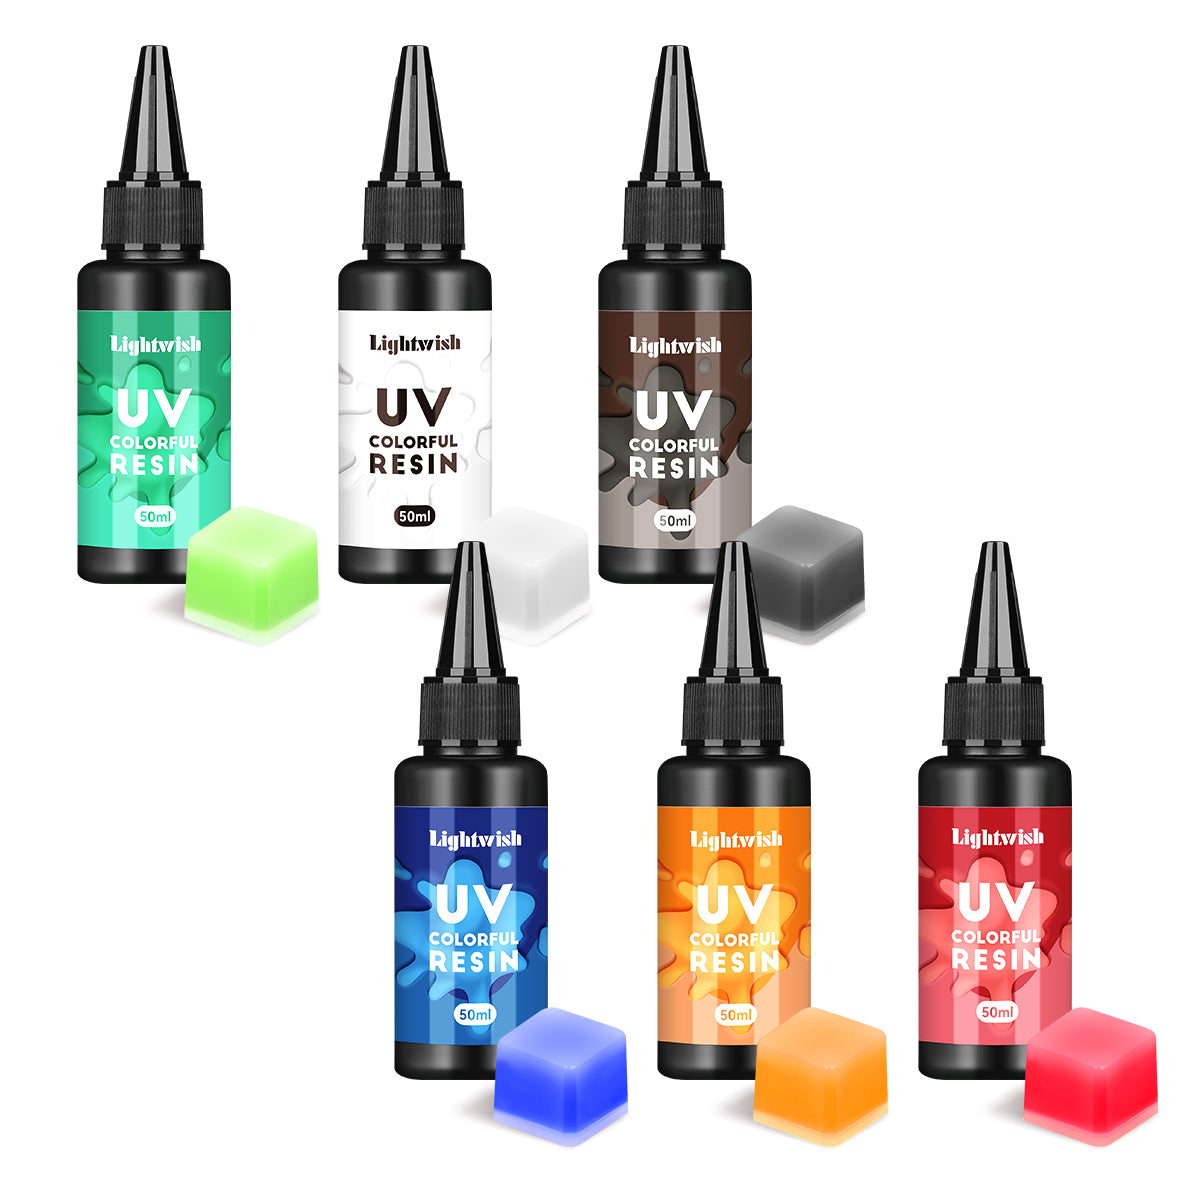 14 Colors, Colored UV-LED Resin, Each 25g, 13 Colors 1 Clear Handcrafter  Resin, Stir/mix Well, Uv-led Hard Type Resin, Cure 1-2 Minutes 